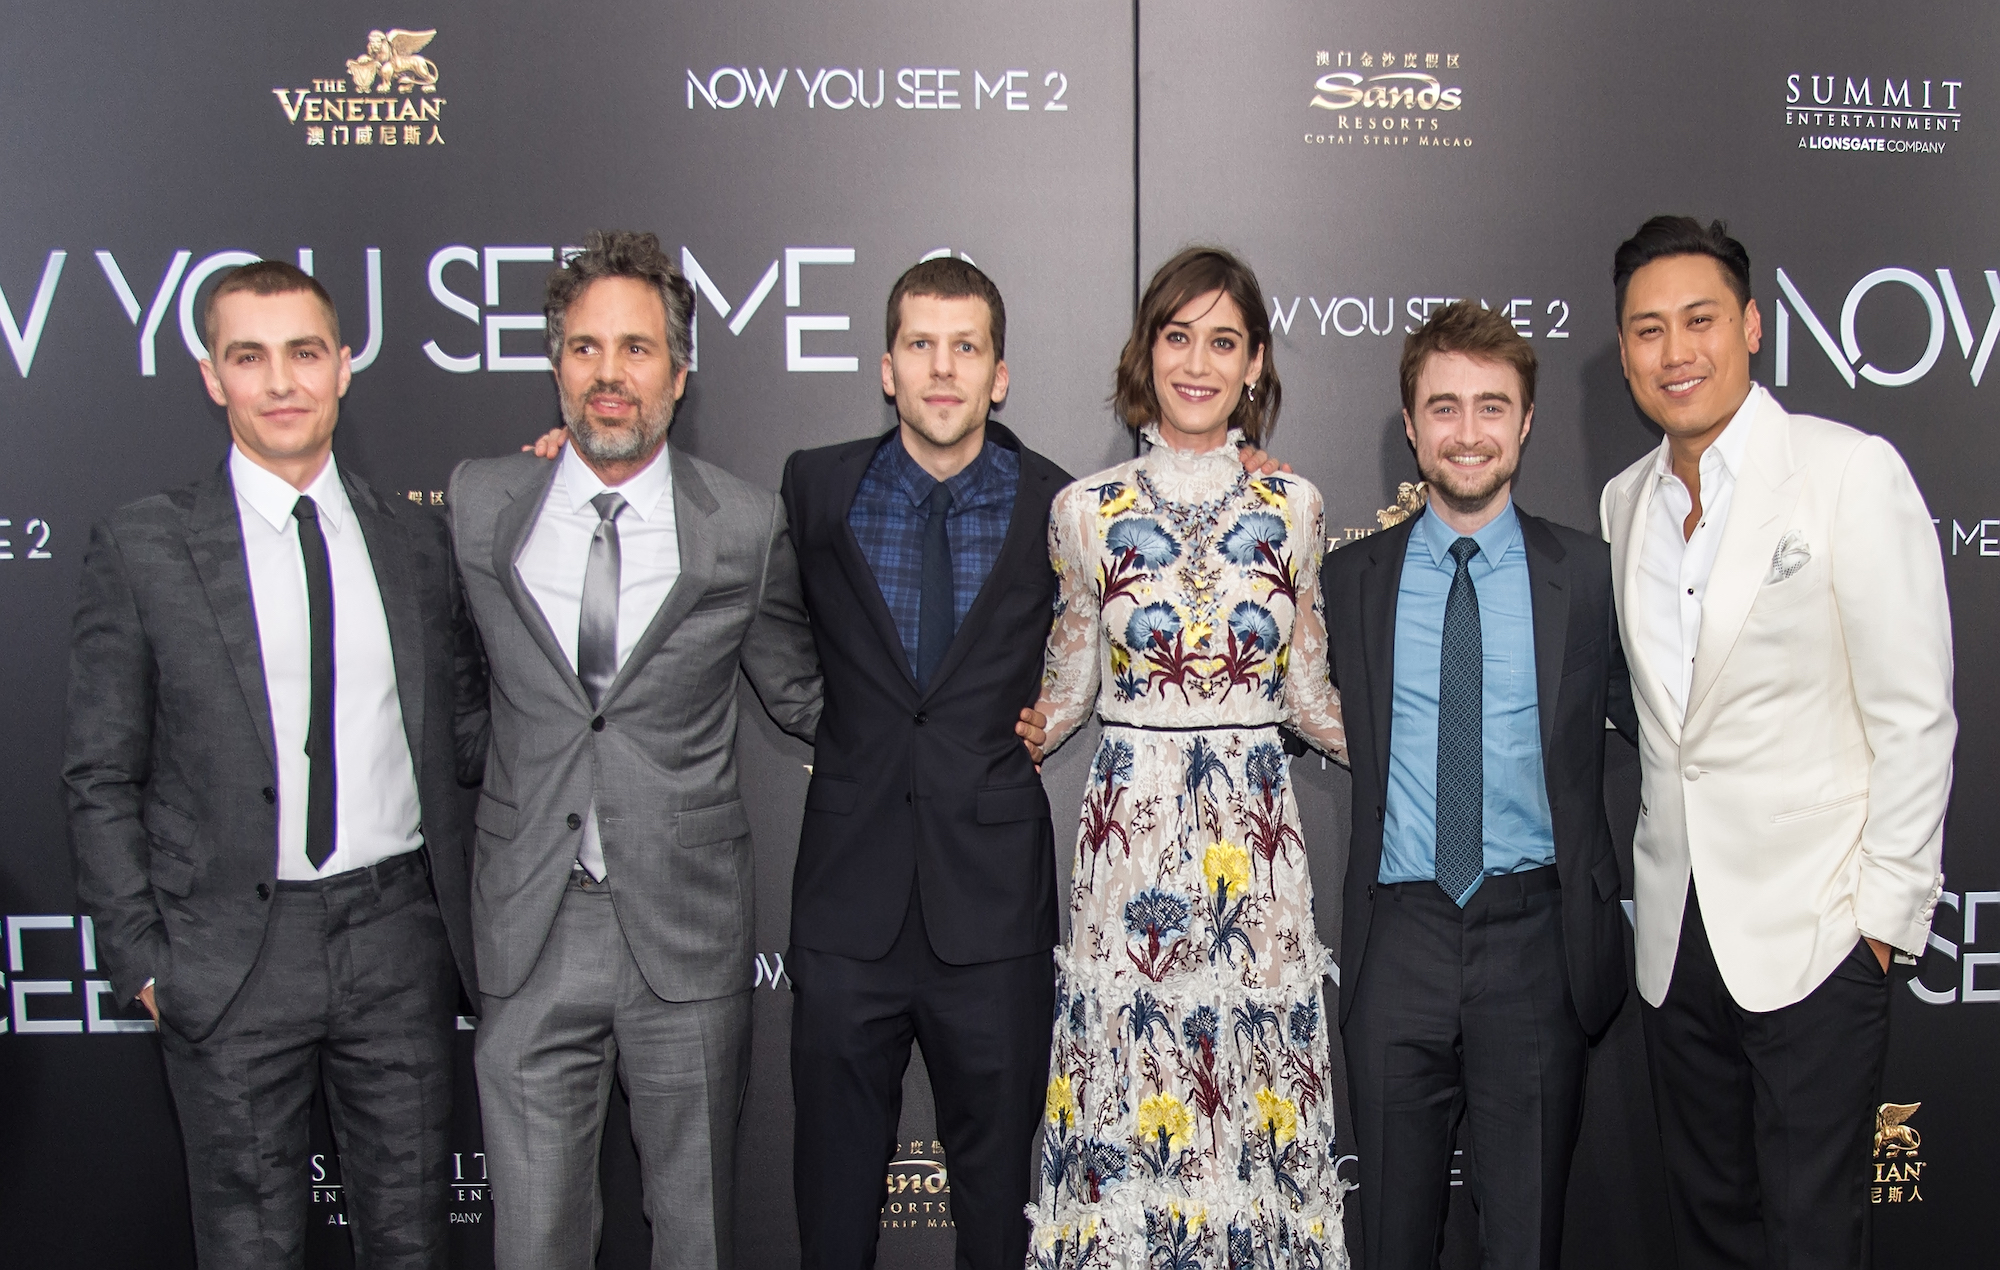 ‘Now You See Me 3’ confirmed with main stars to reprise roles